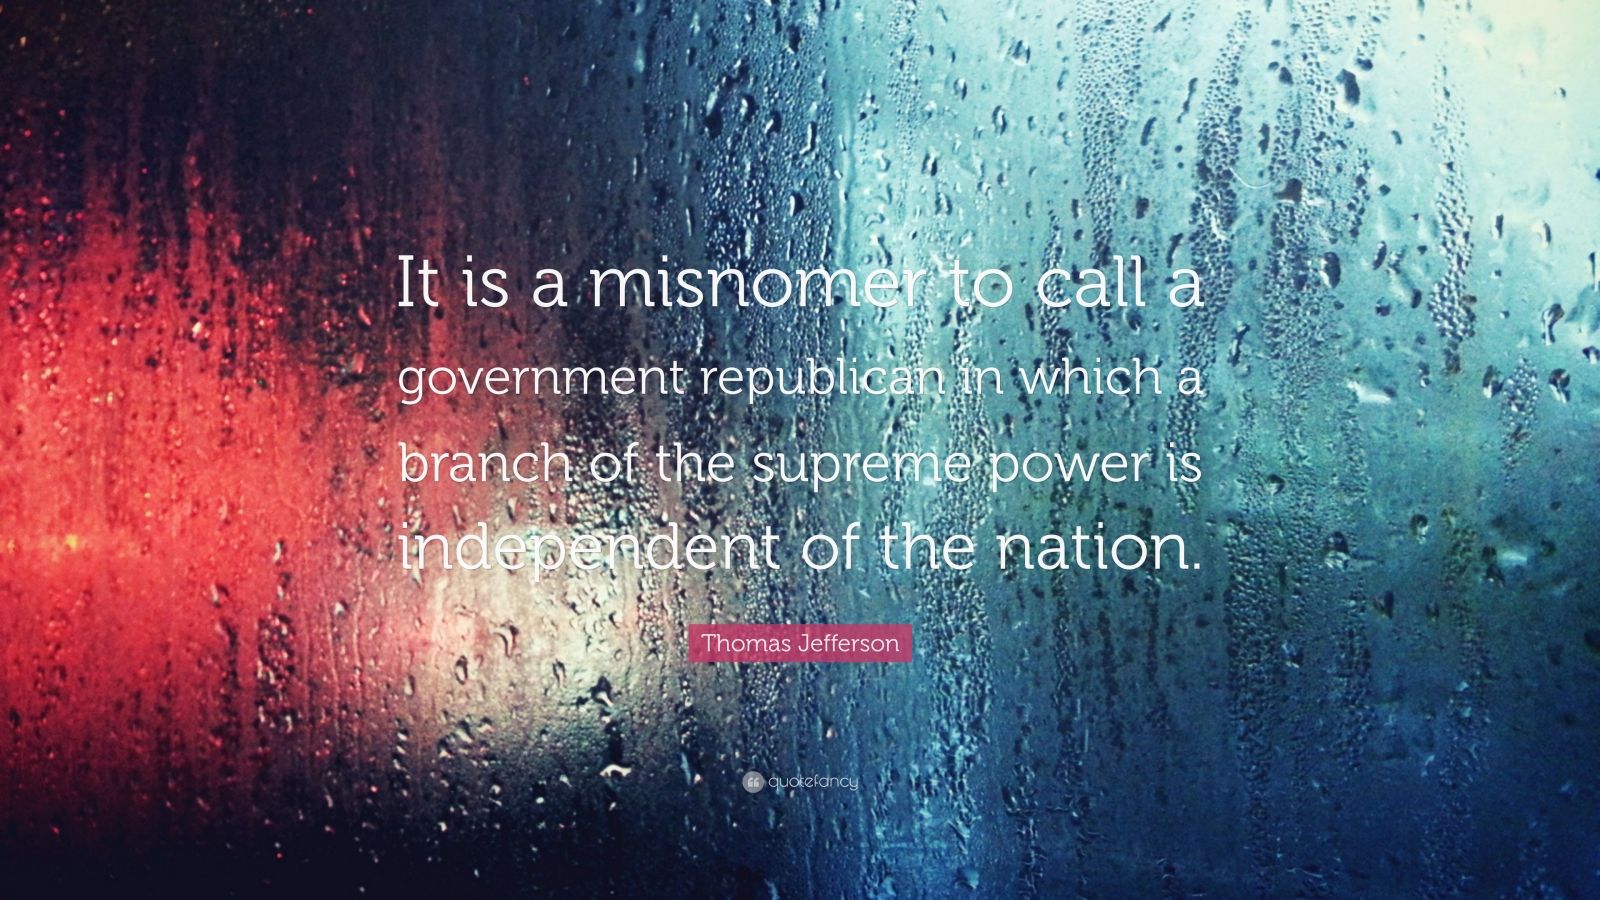 6133219 Thomas Jefferson Quote It is a misnomer to call a government